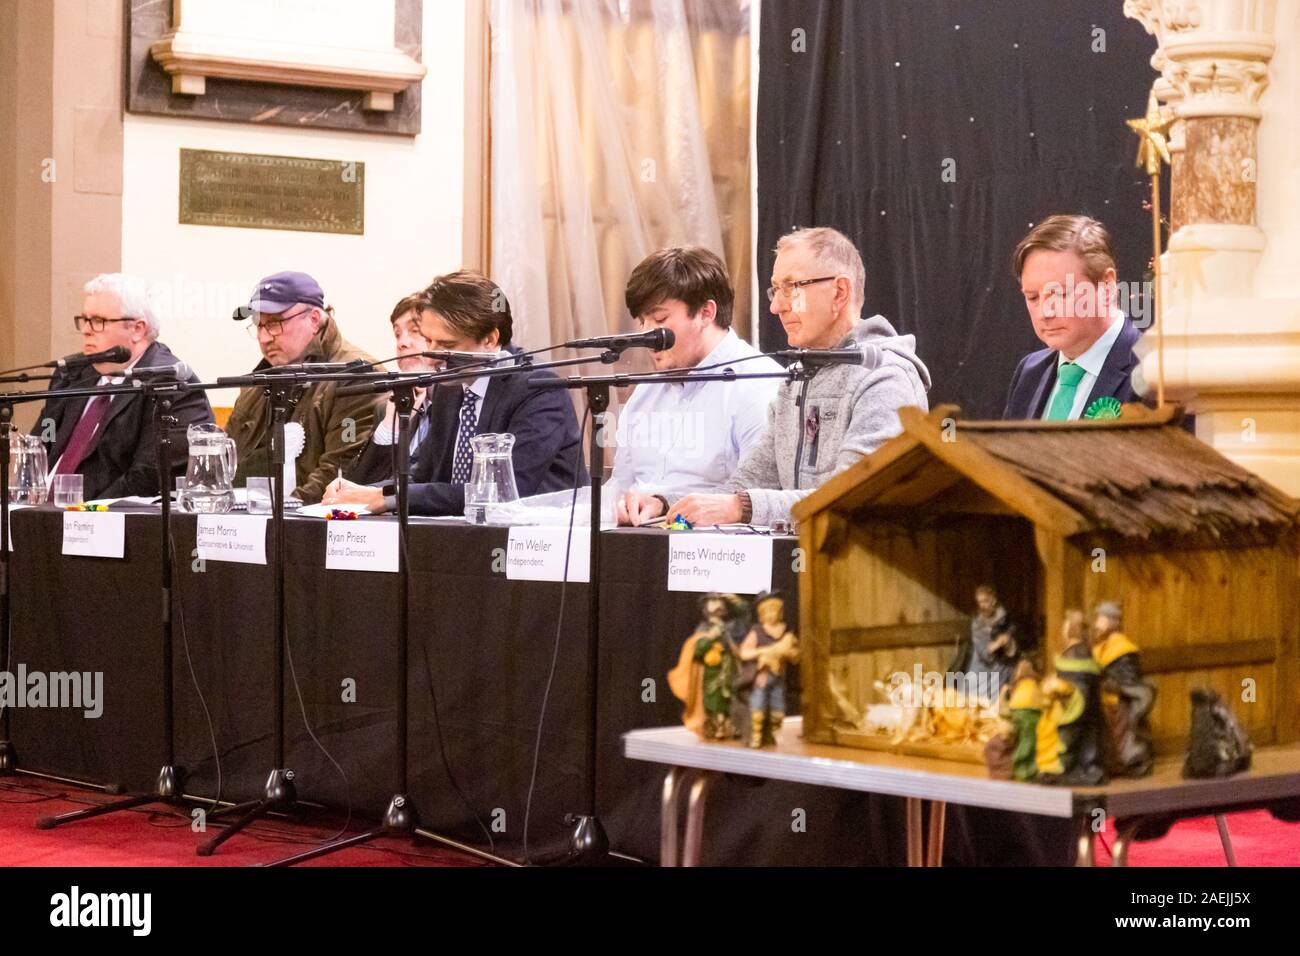 Cradley Heath, West Midlands, UK. 9th December, 2019. In the final few days of election campaigning, six parliamentary candidates hoping to represent Halesowen and Rowley Regis constuency have hustings in a parish church in the heart of the Black Country in the West Midlands. The hustings is held in the chancel of Holy Trinity (Church of England) with the public occupying the pews, and was organised by Richard Hackett, the church's curate, and chaired by the vicar Reverend Nick Gowers. Credit: Peter Lopeman/Alamy Live News Stock Photo